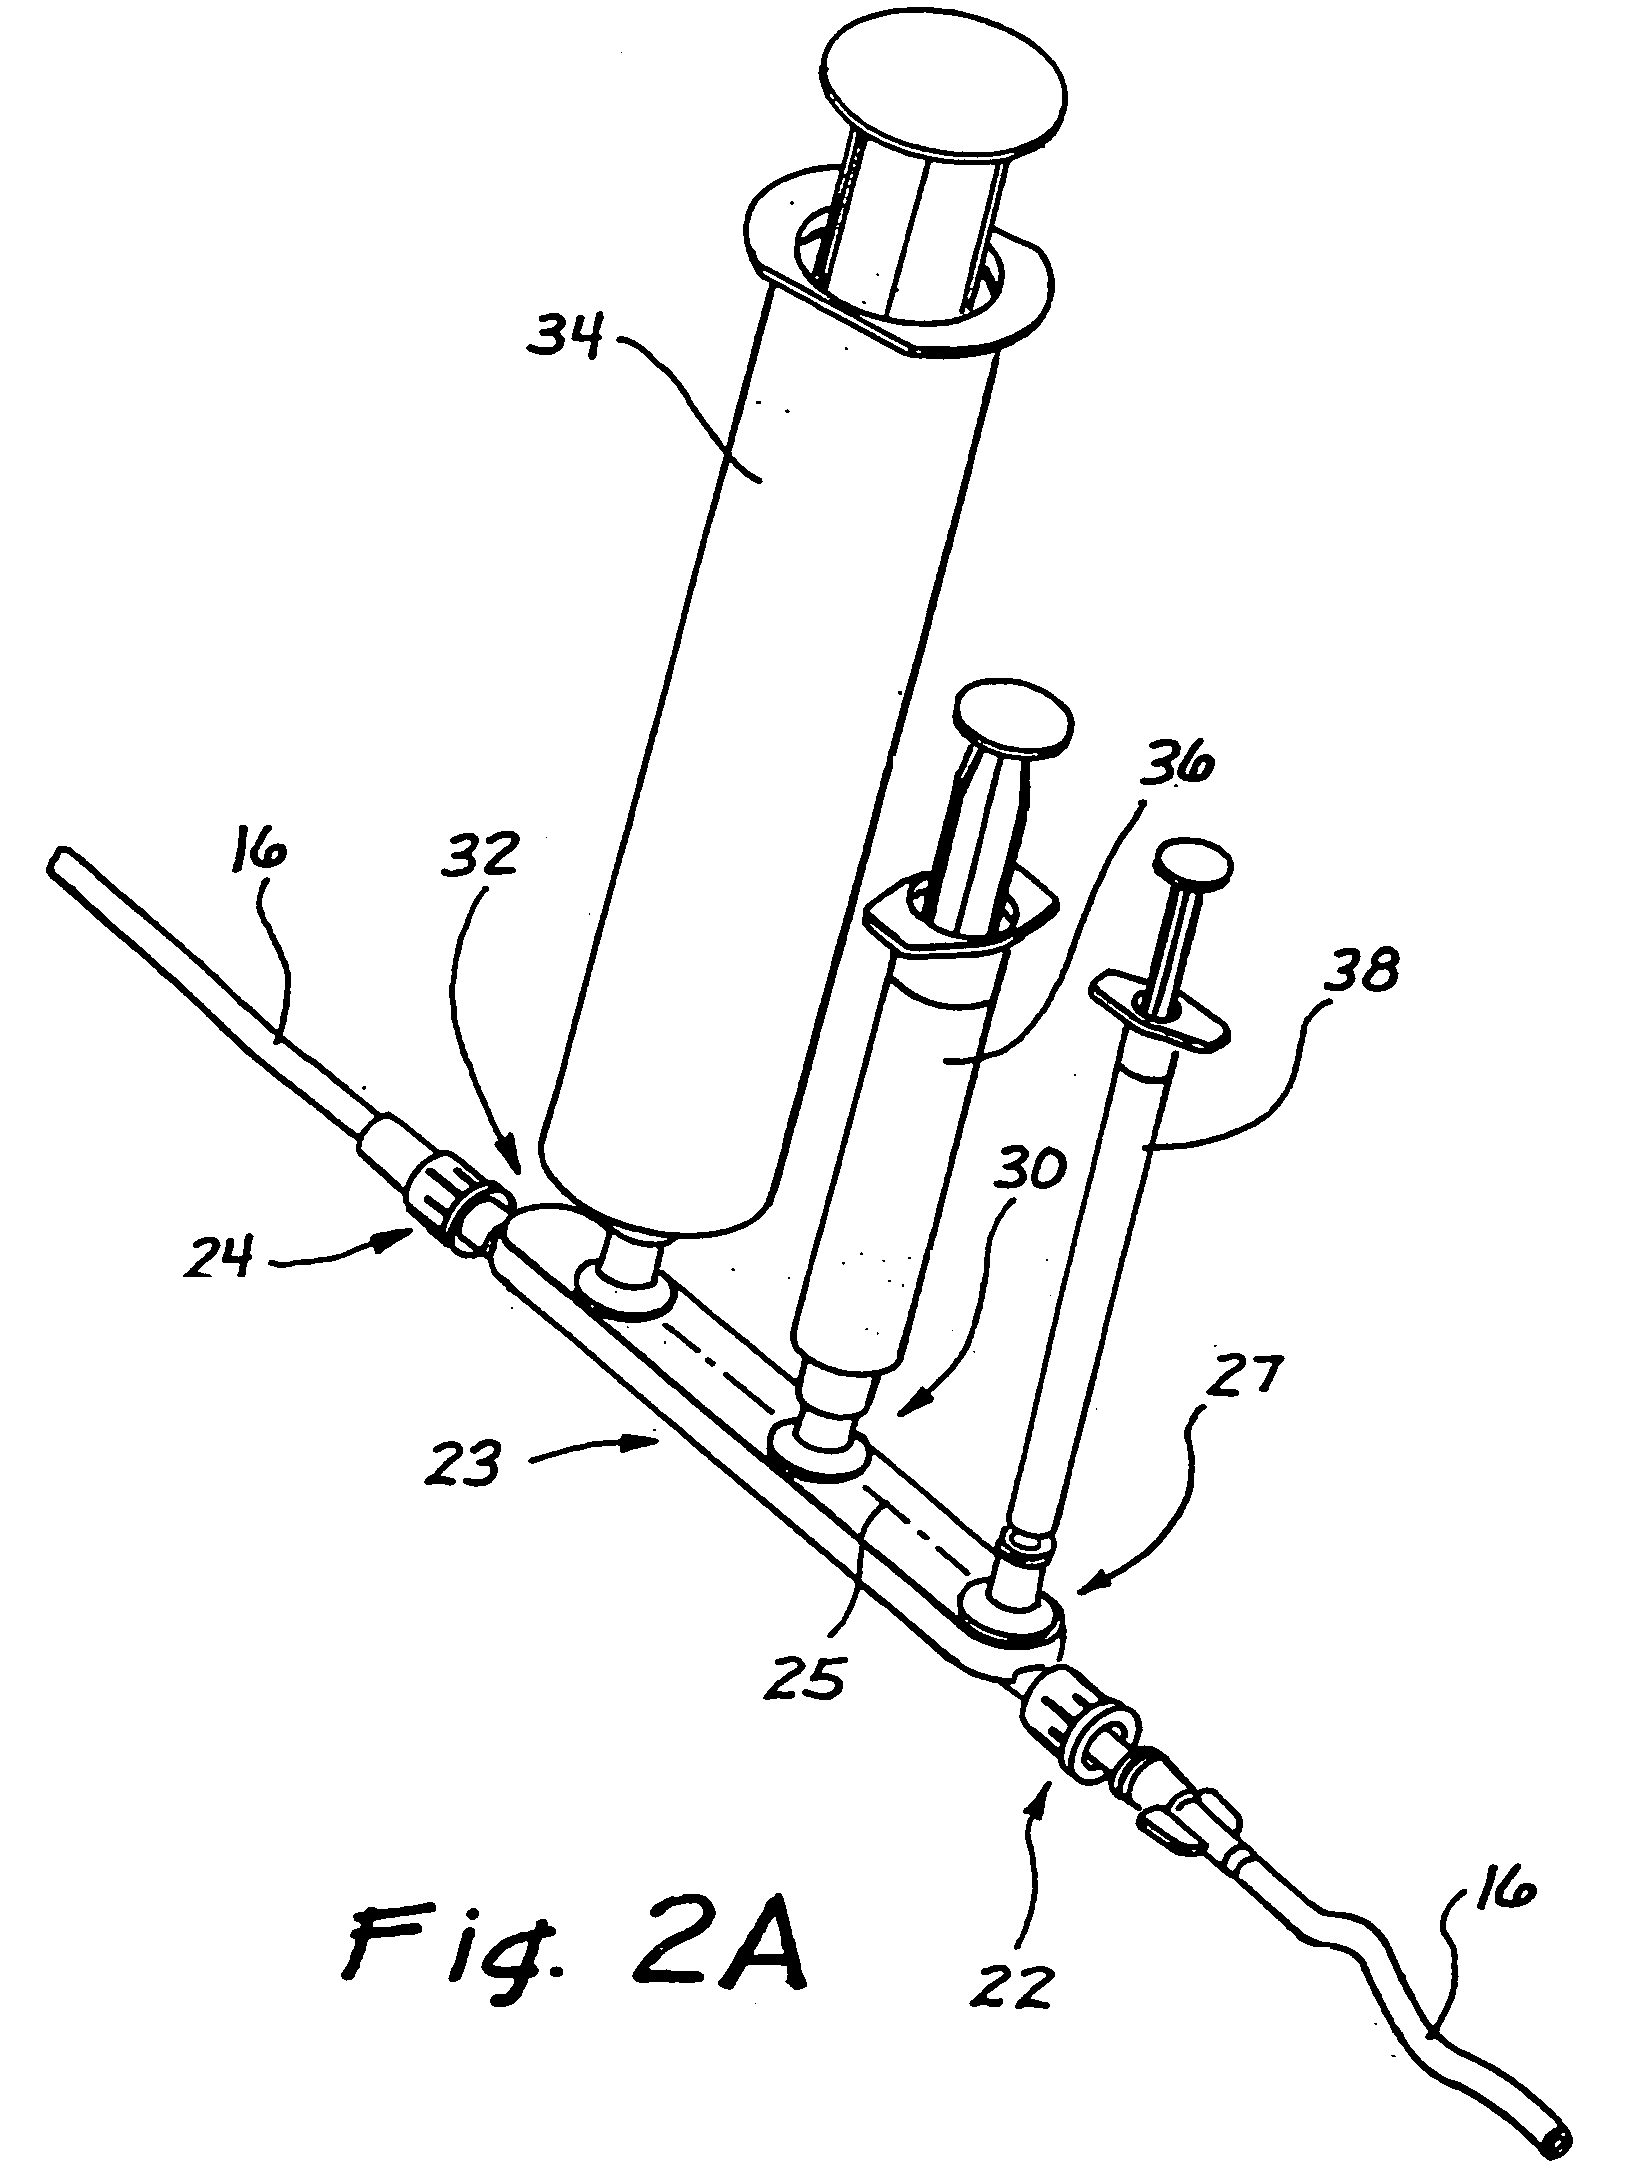 Multi-valve injection/aspiration manifold with needleless access connection